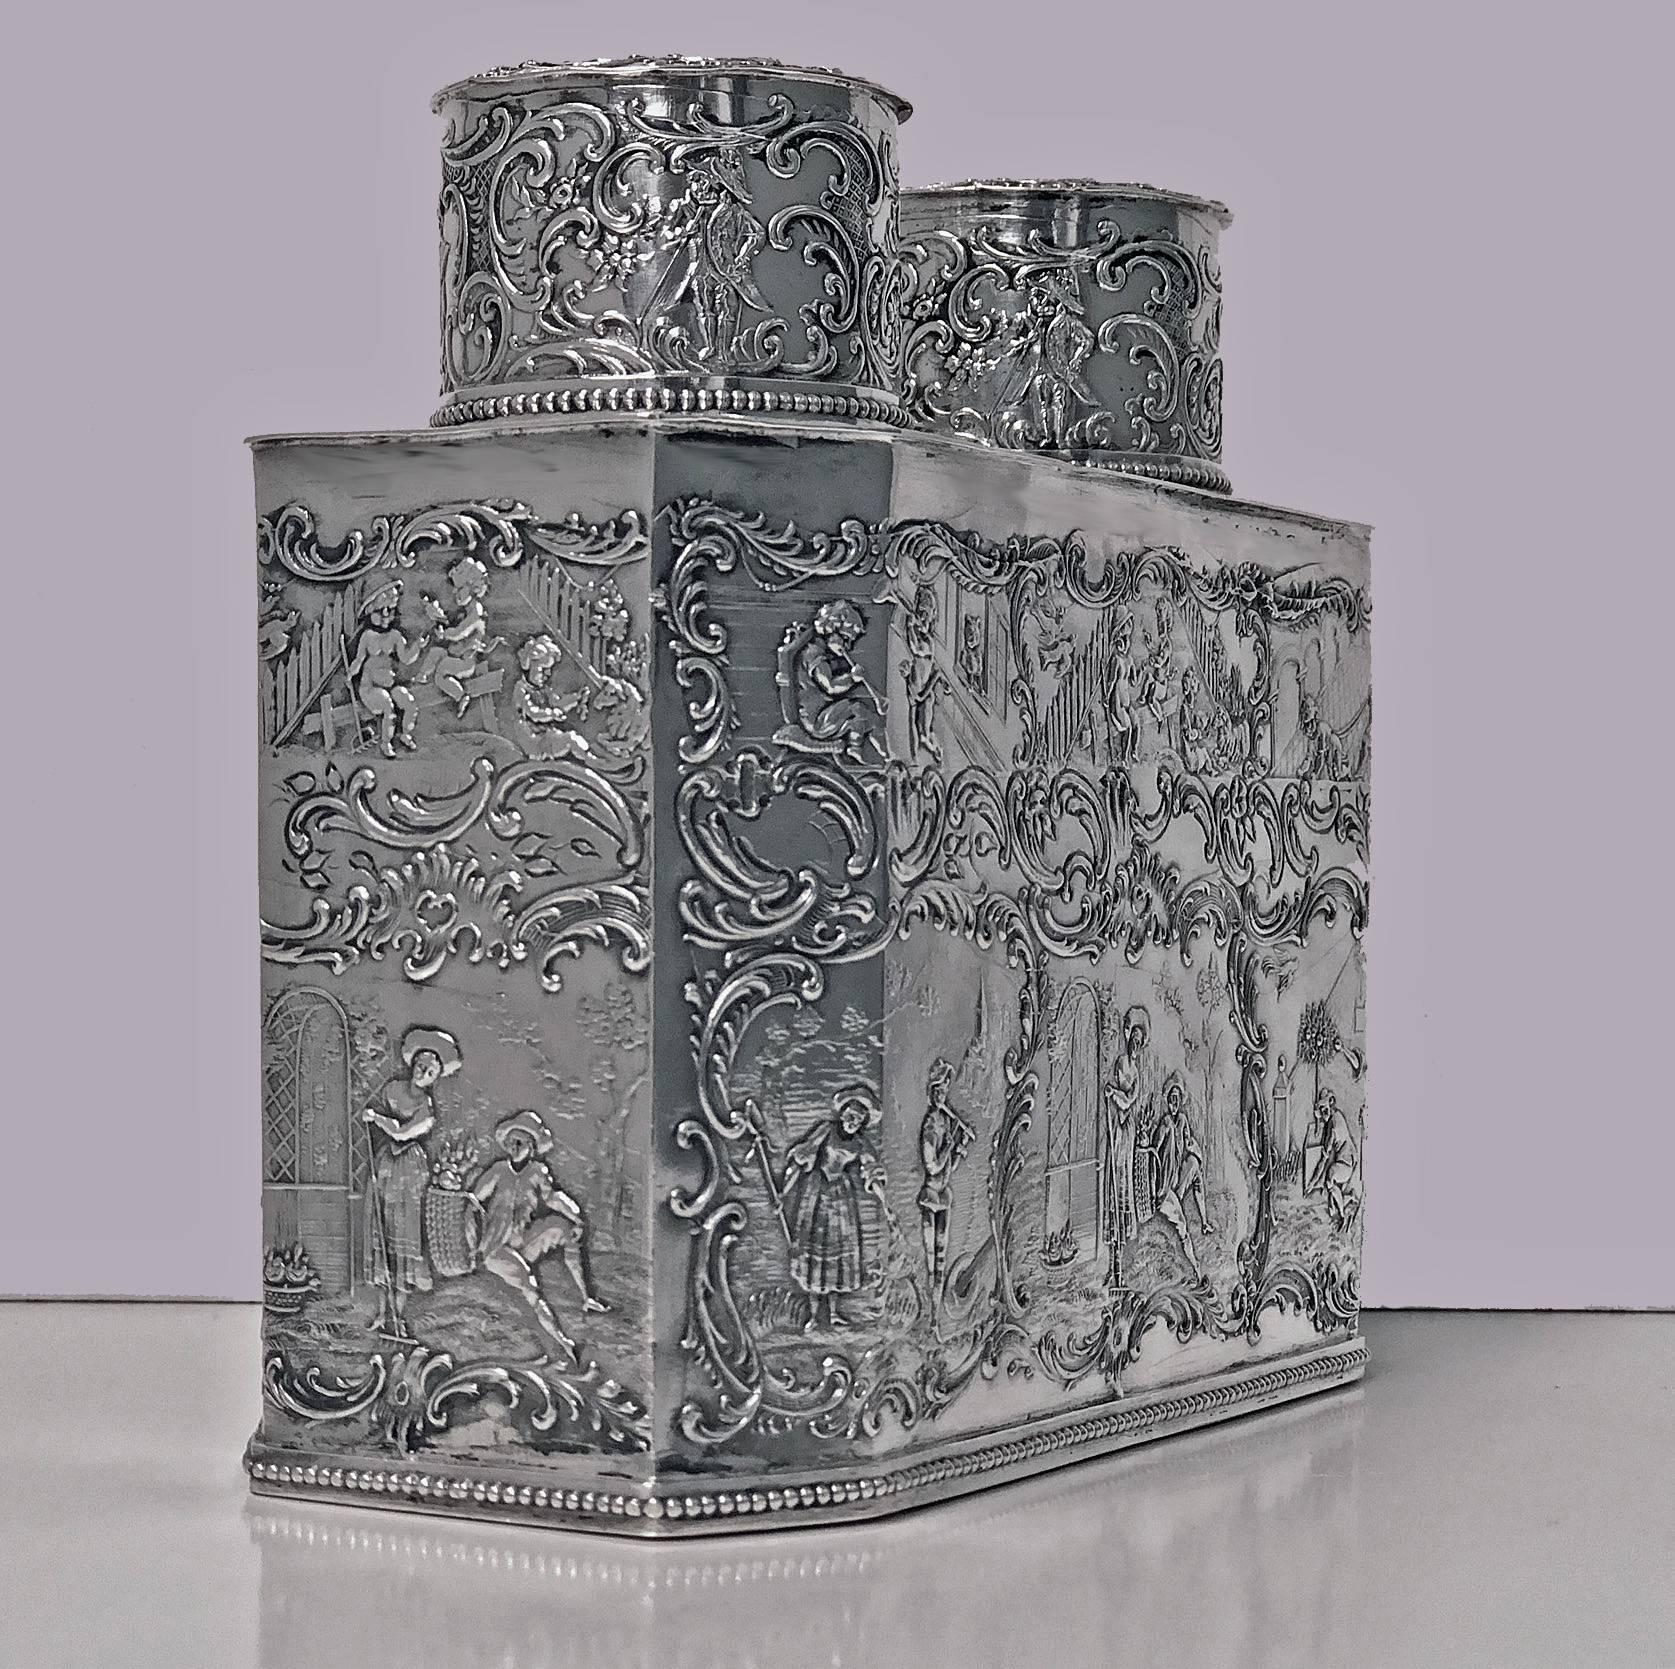 Very rare 19th century double compartment silver tea caddy, Germany, circa 1890. The tea caddy of rectangular octagonal form depicting musical ballad pastoral scenes of figures and cherubs and animals. The pull off cover tops reveals a divided